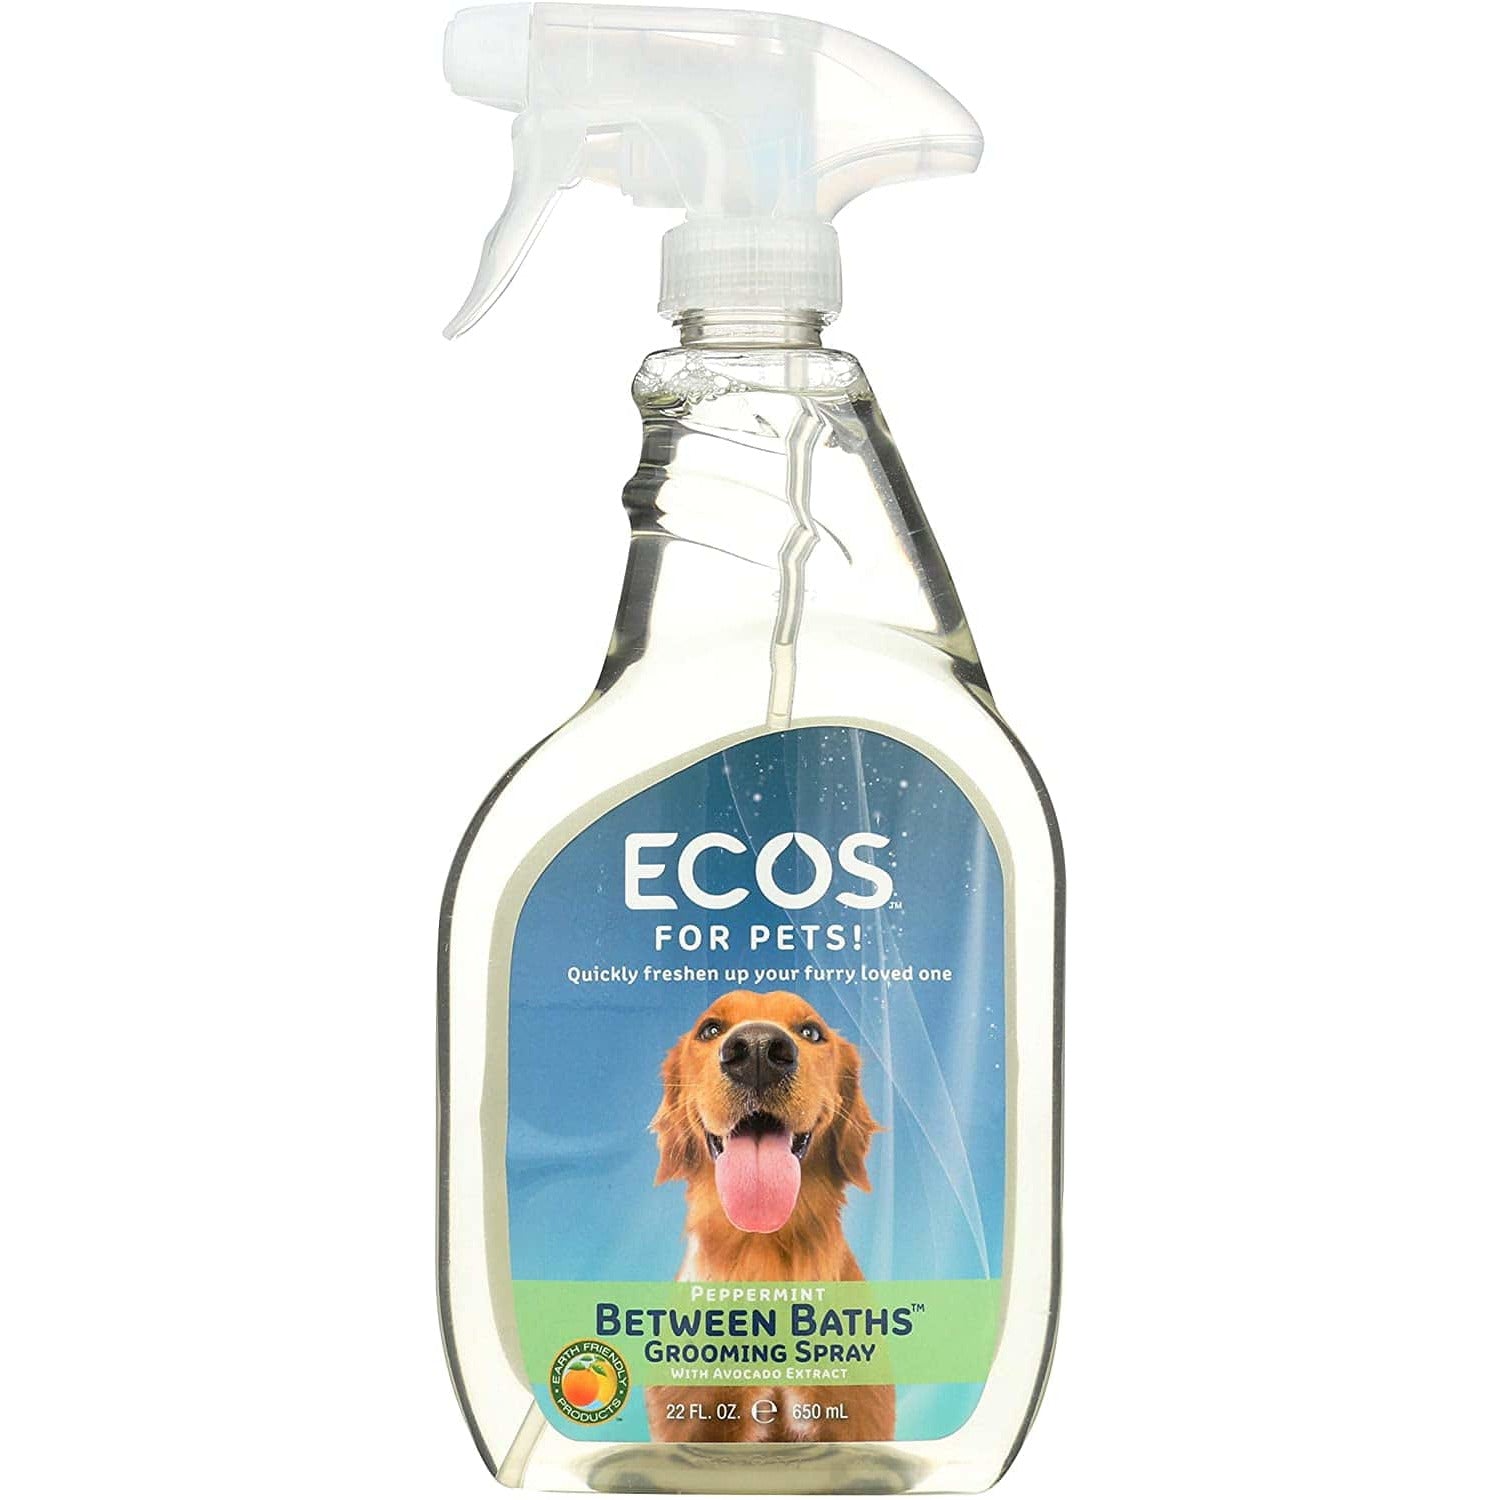 Earth Friendly Products Dander-Out Spray, Natural Pet Formula - 22 fl oz